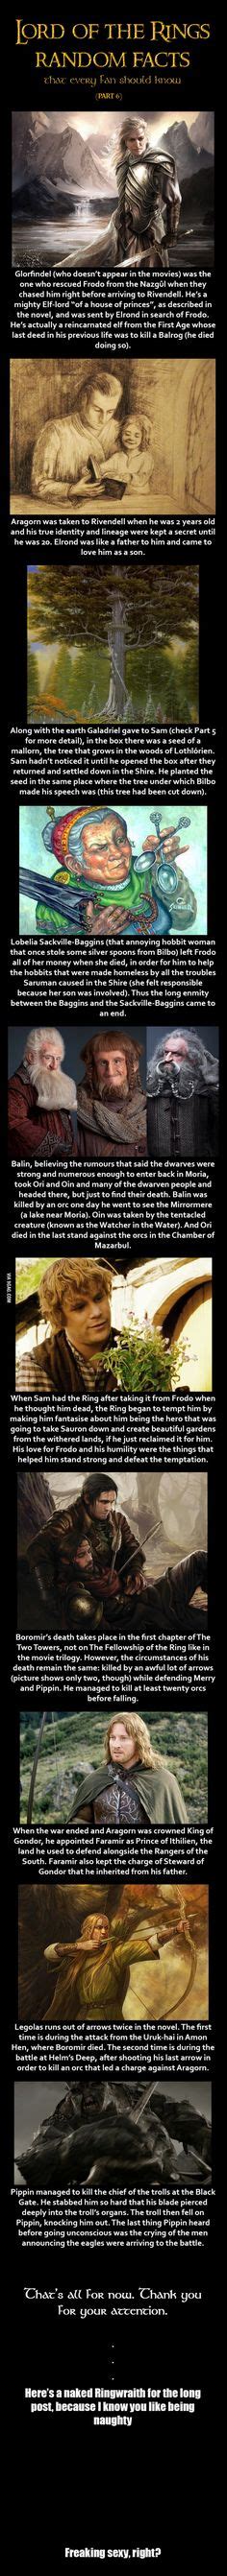 1000 Images About Lord Of The Rings On Pinterest Lotr